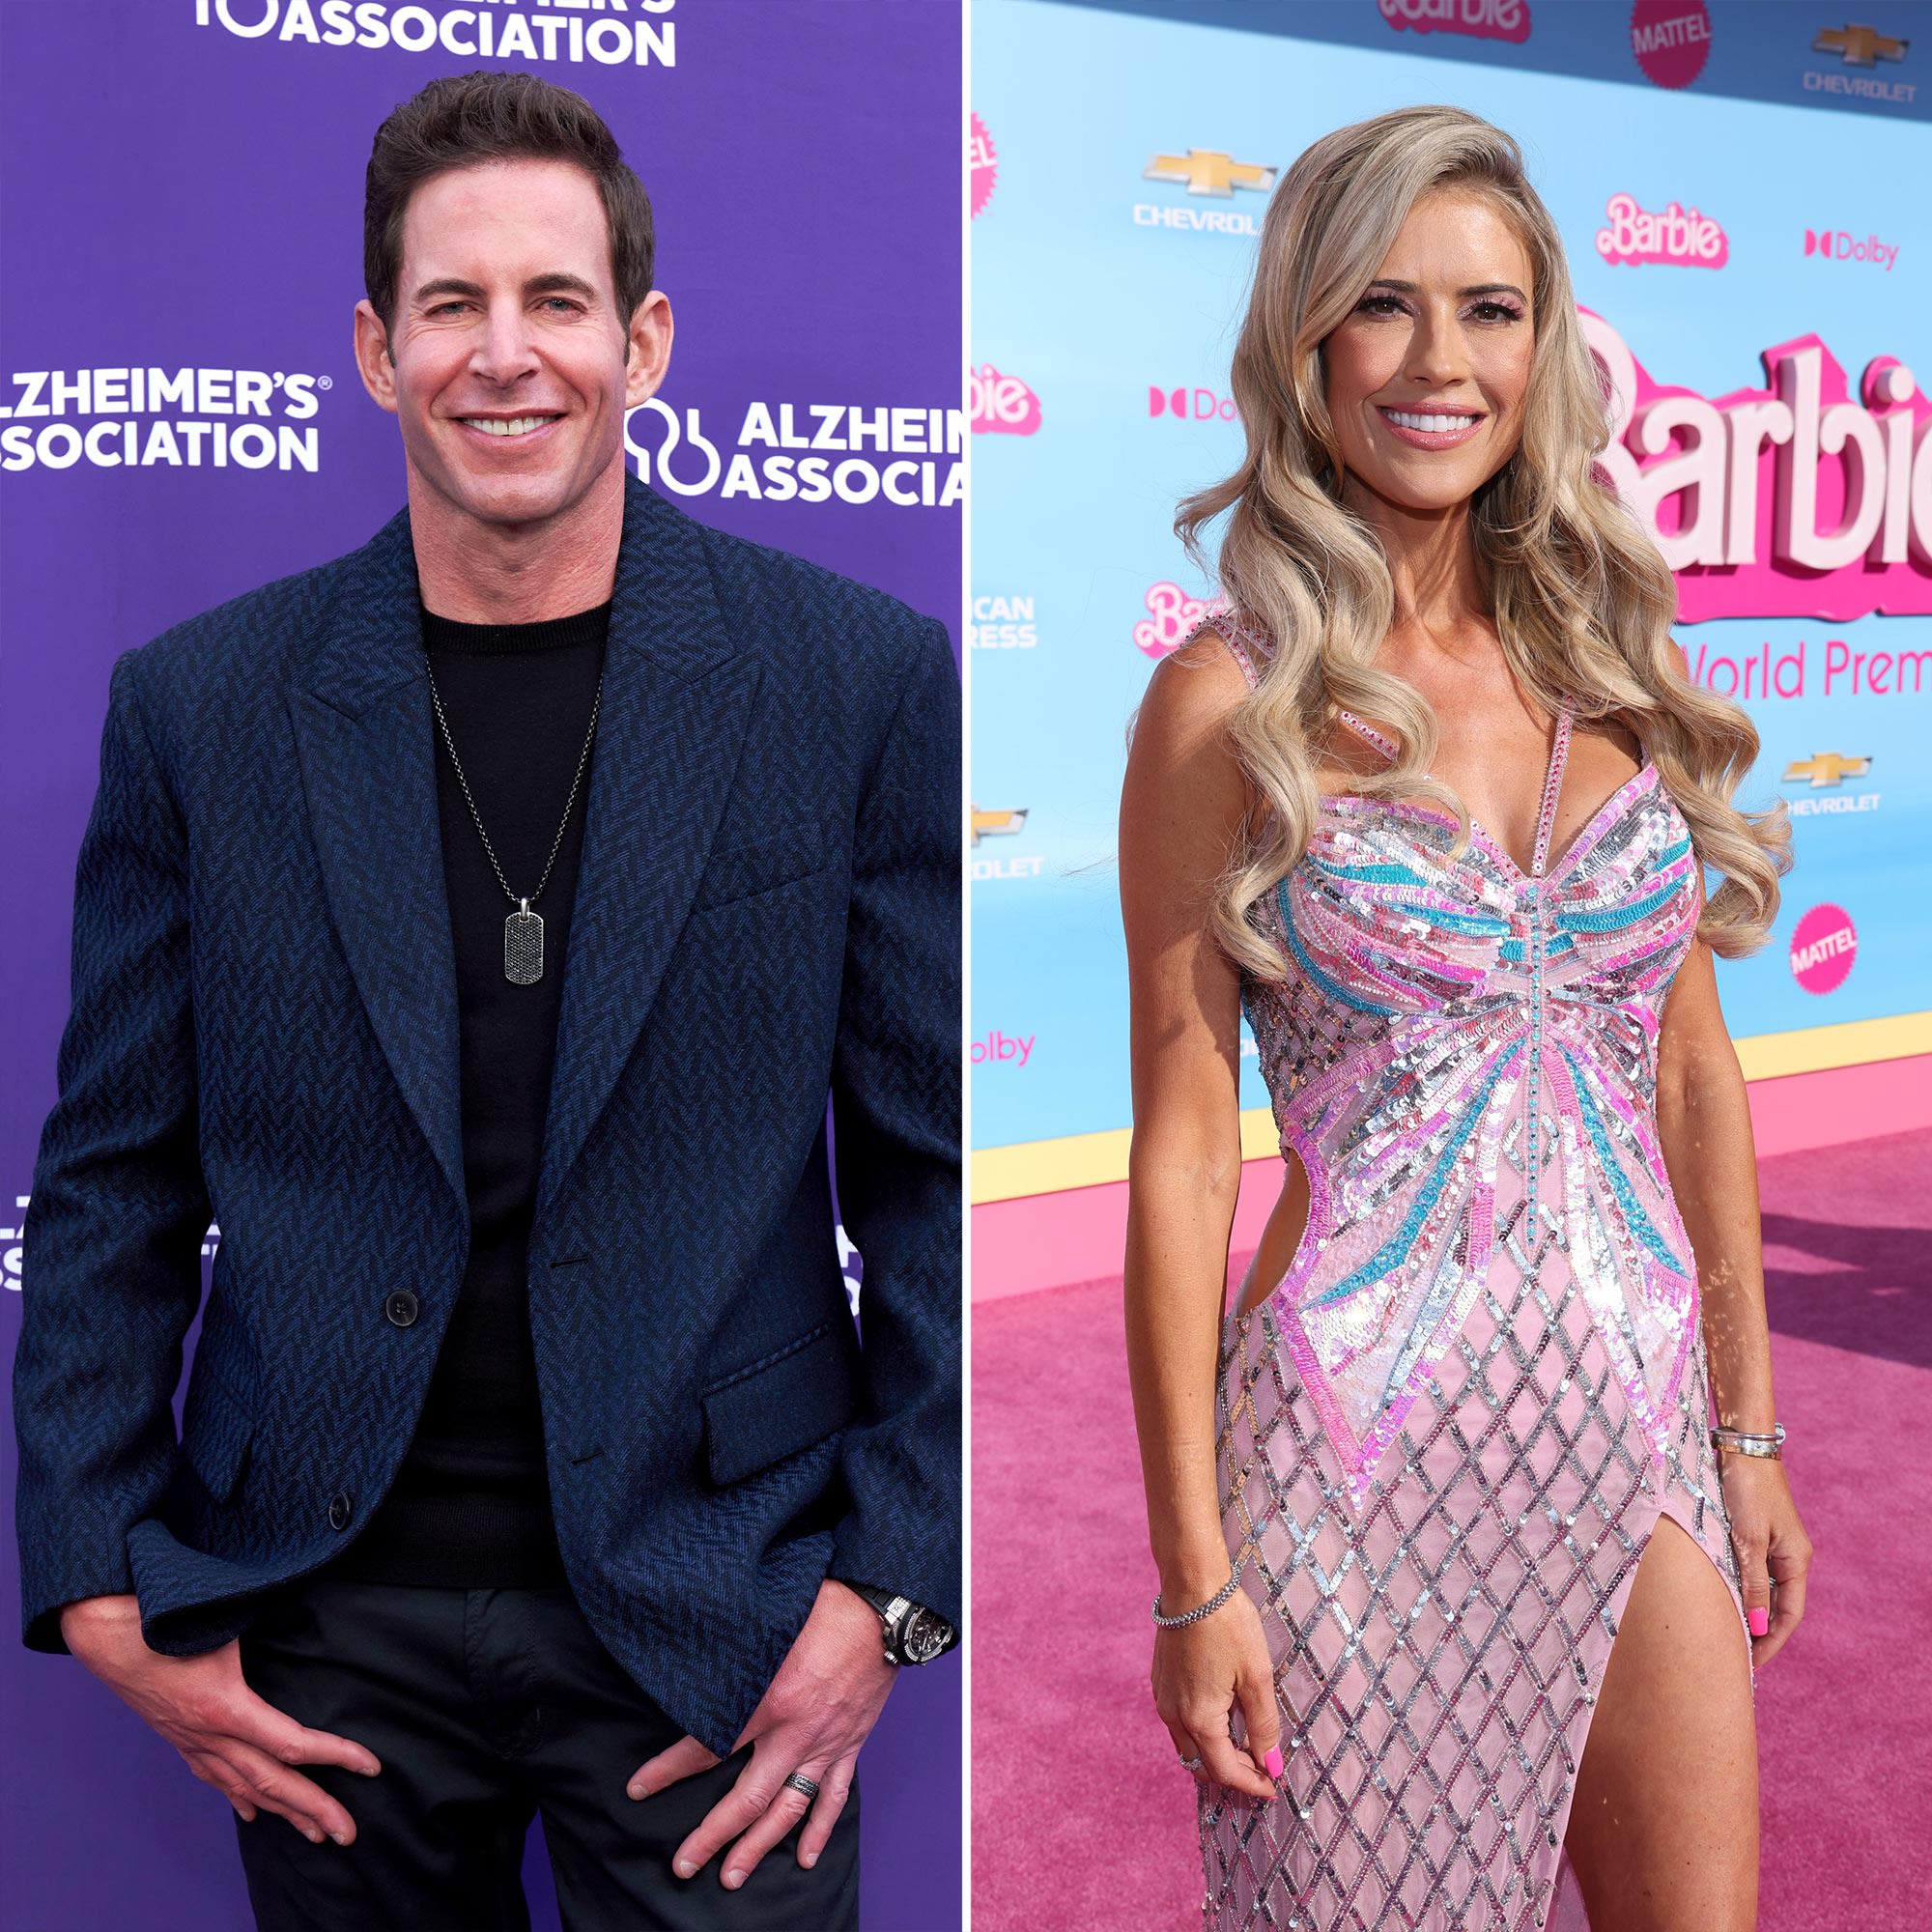 Tarek El Moussa Uses Photo From Infamous Soccer Fight for Ex Christina Hall’s Phone Contact